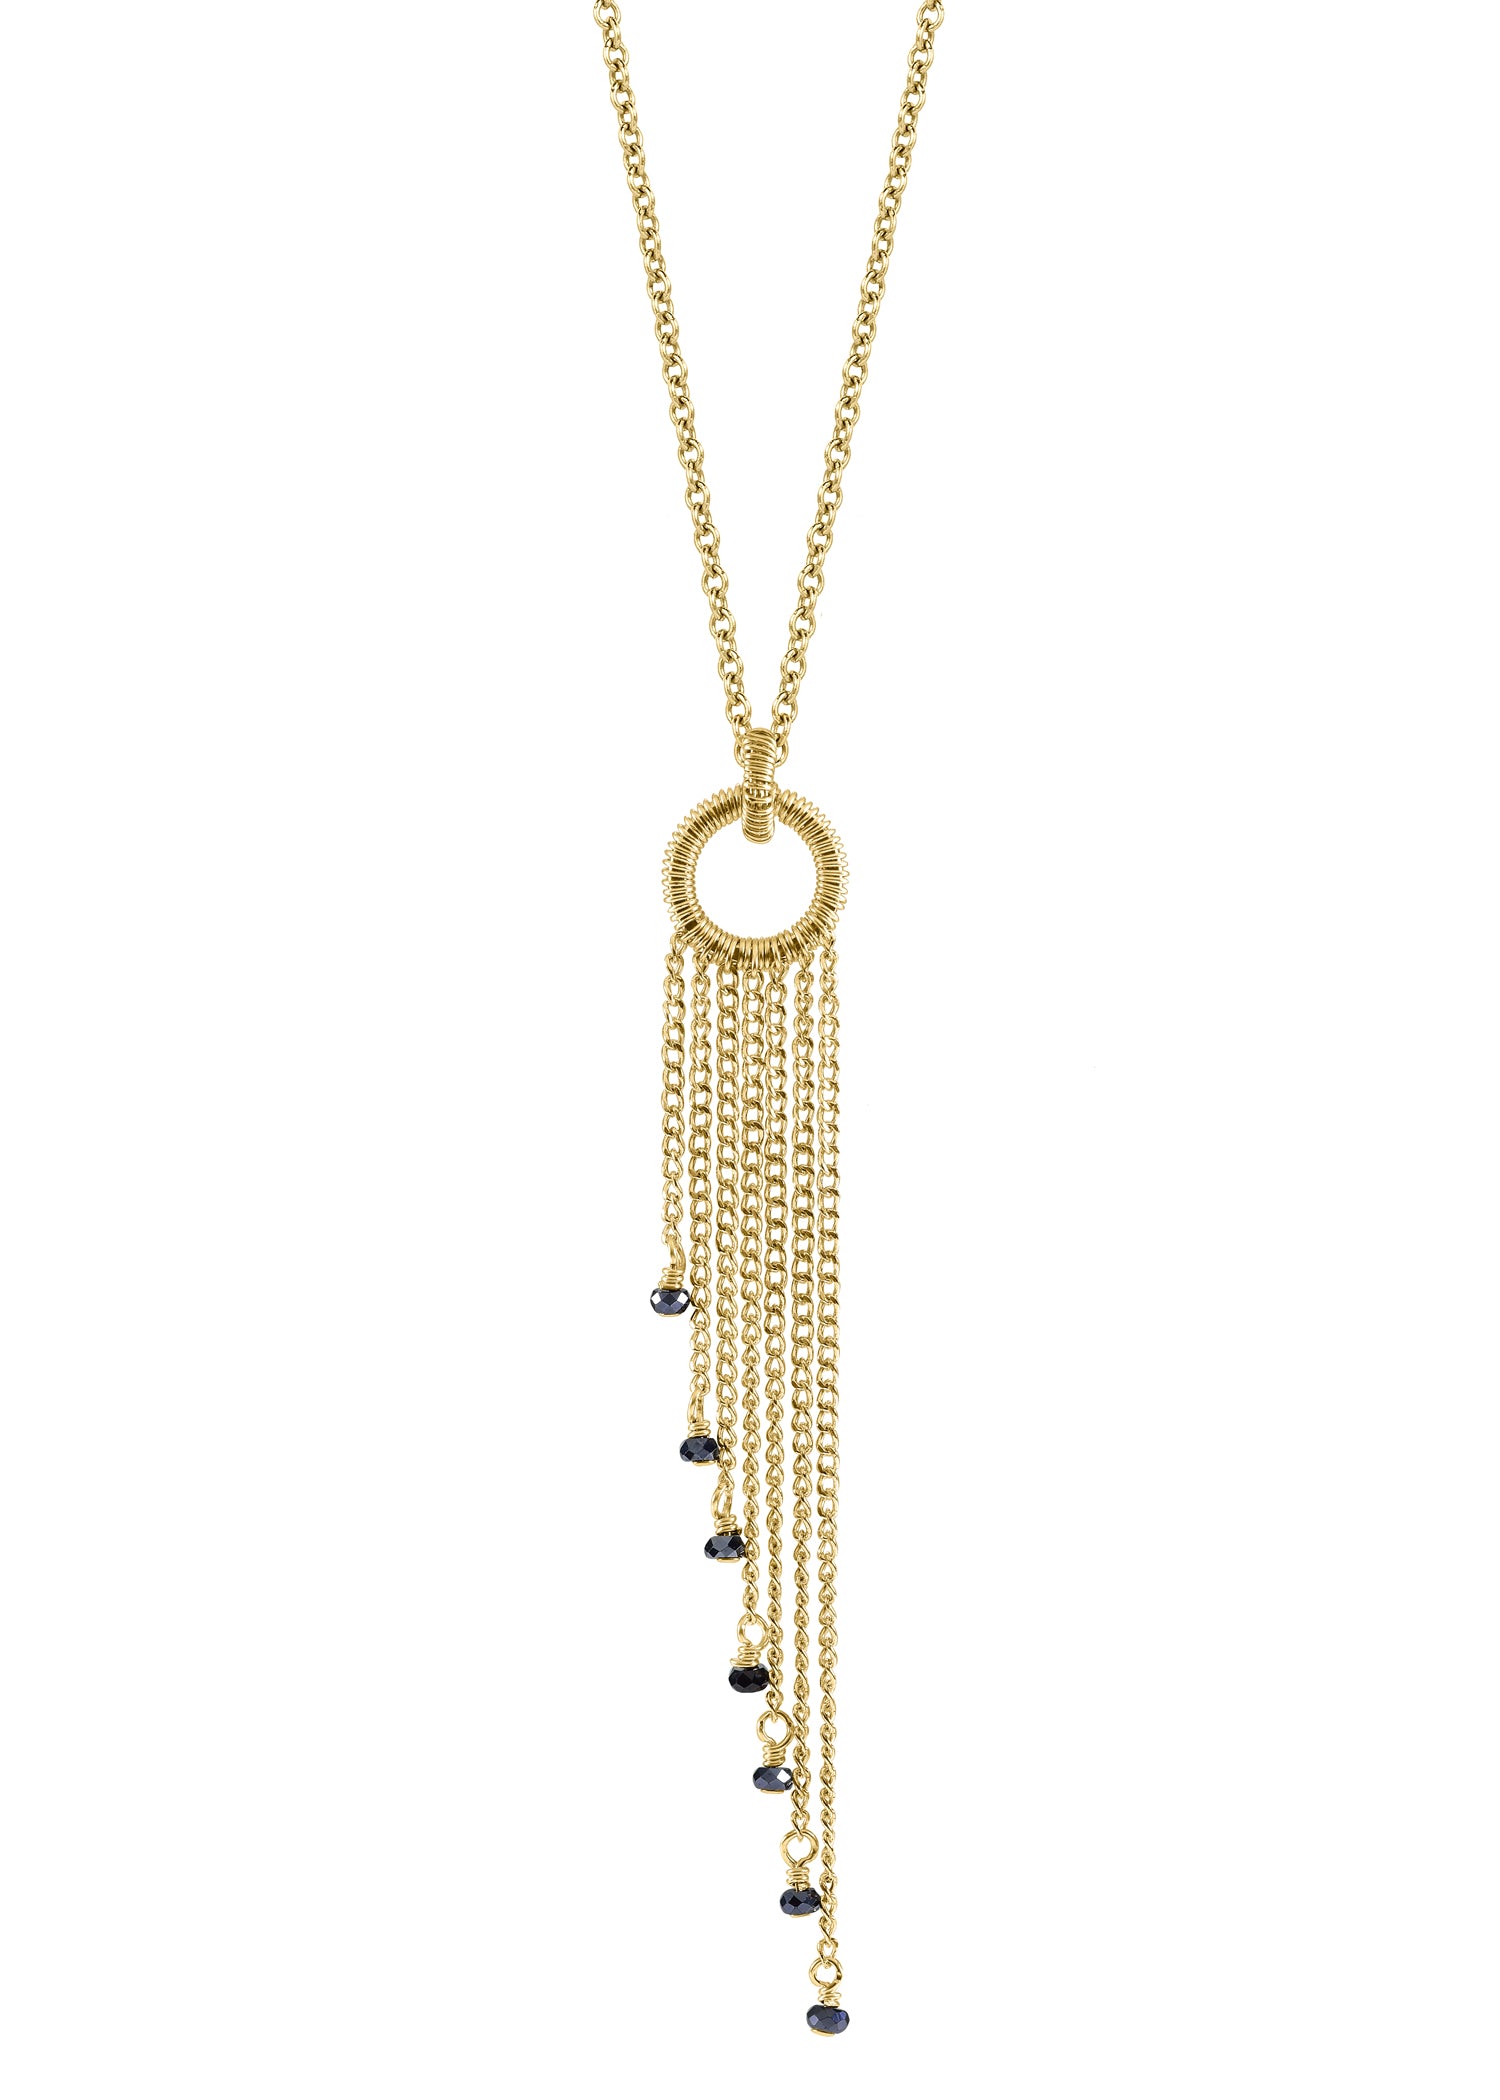 Black spinel 14k gold fill Chain measures 17" in length Pendant measures 2-3/8" in length and 5/16" in width across the frame Handmade in our Los Angeles studio